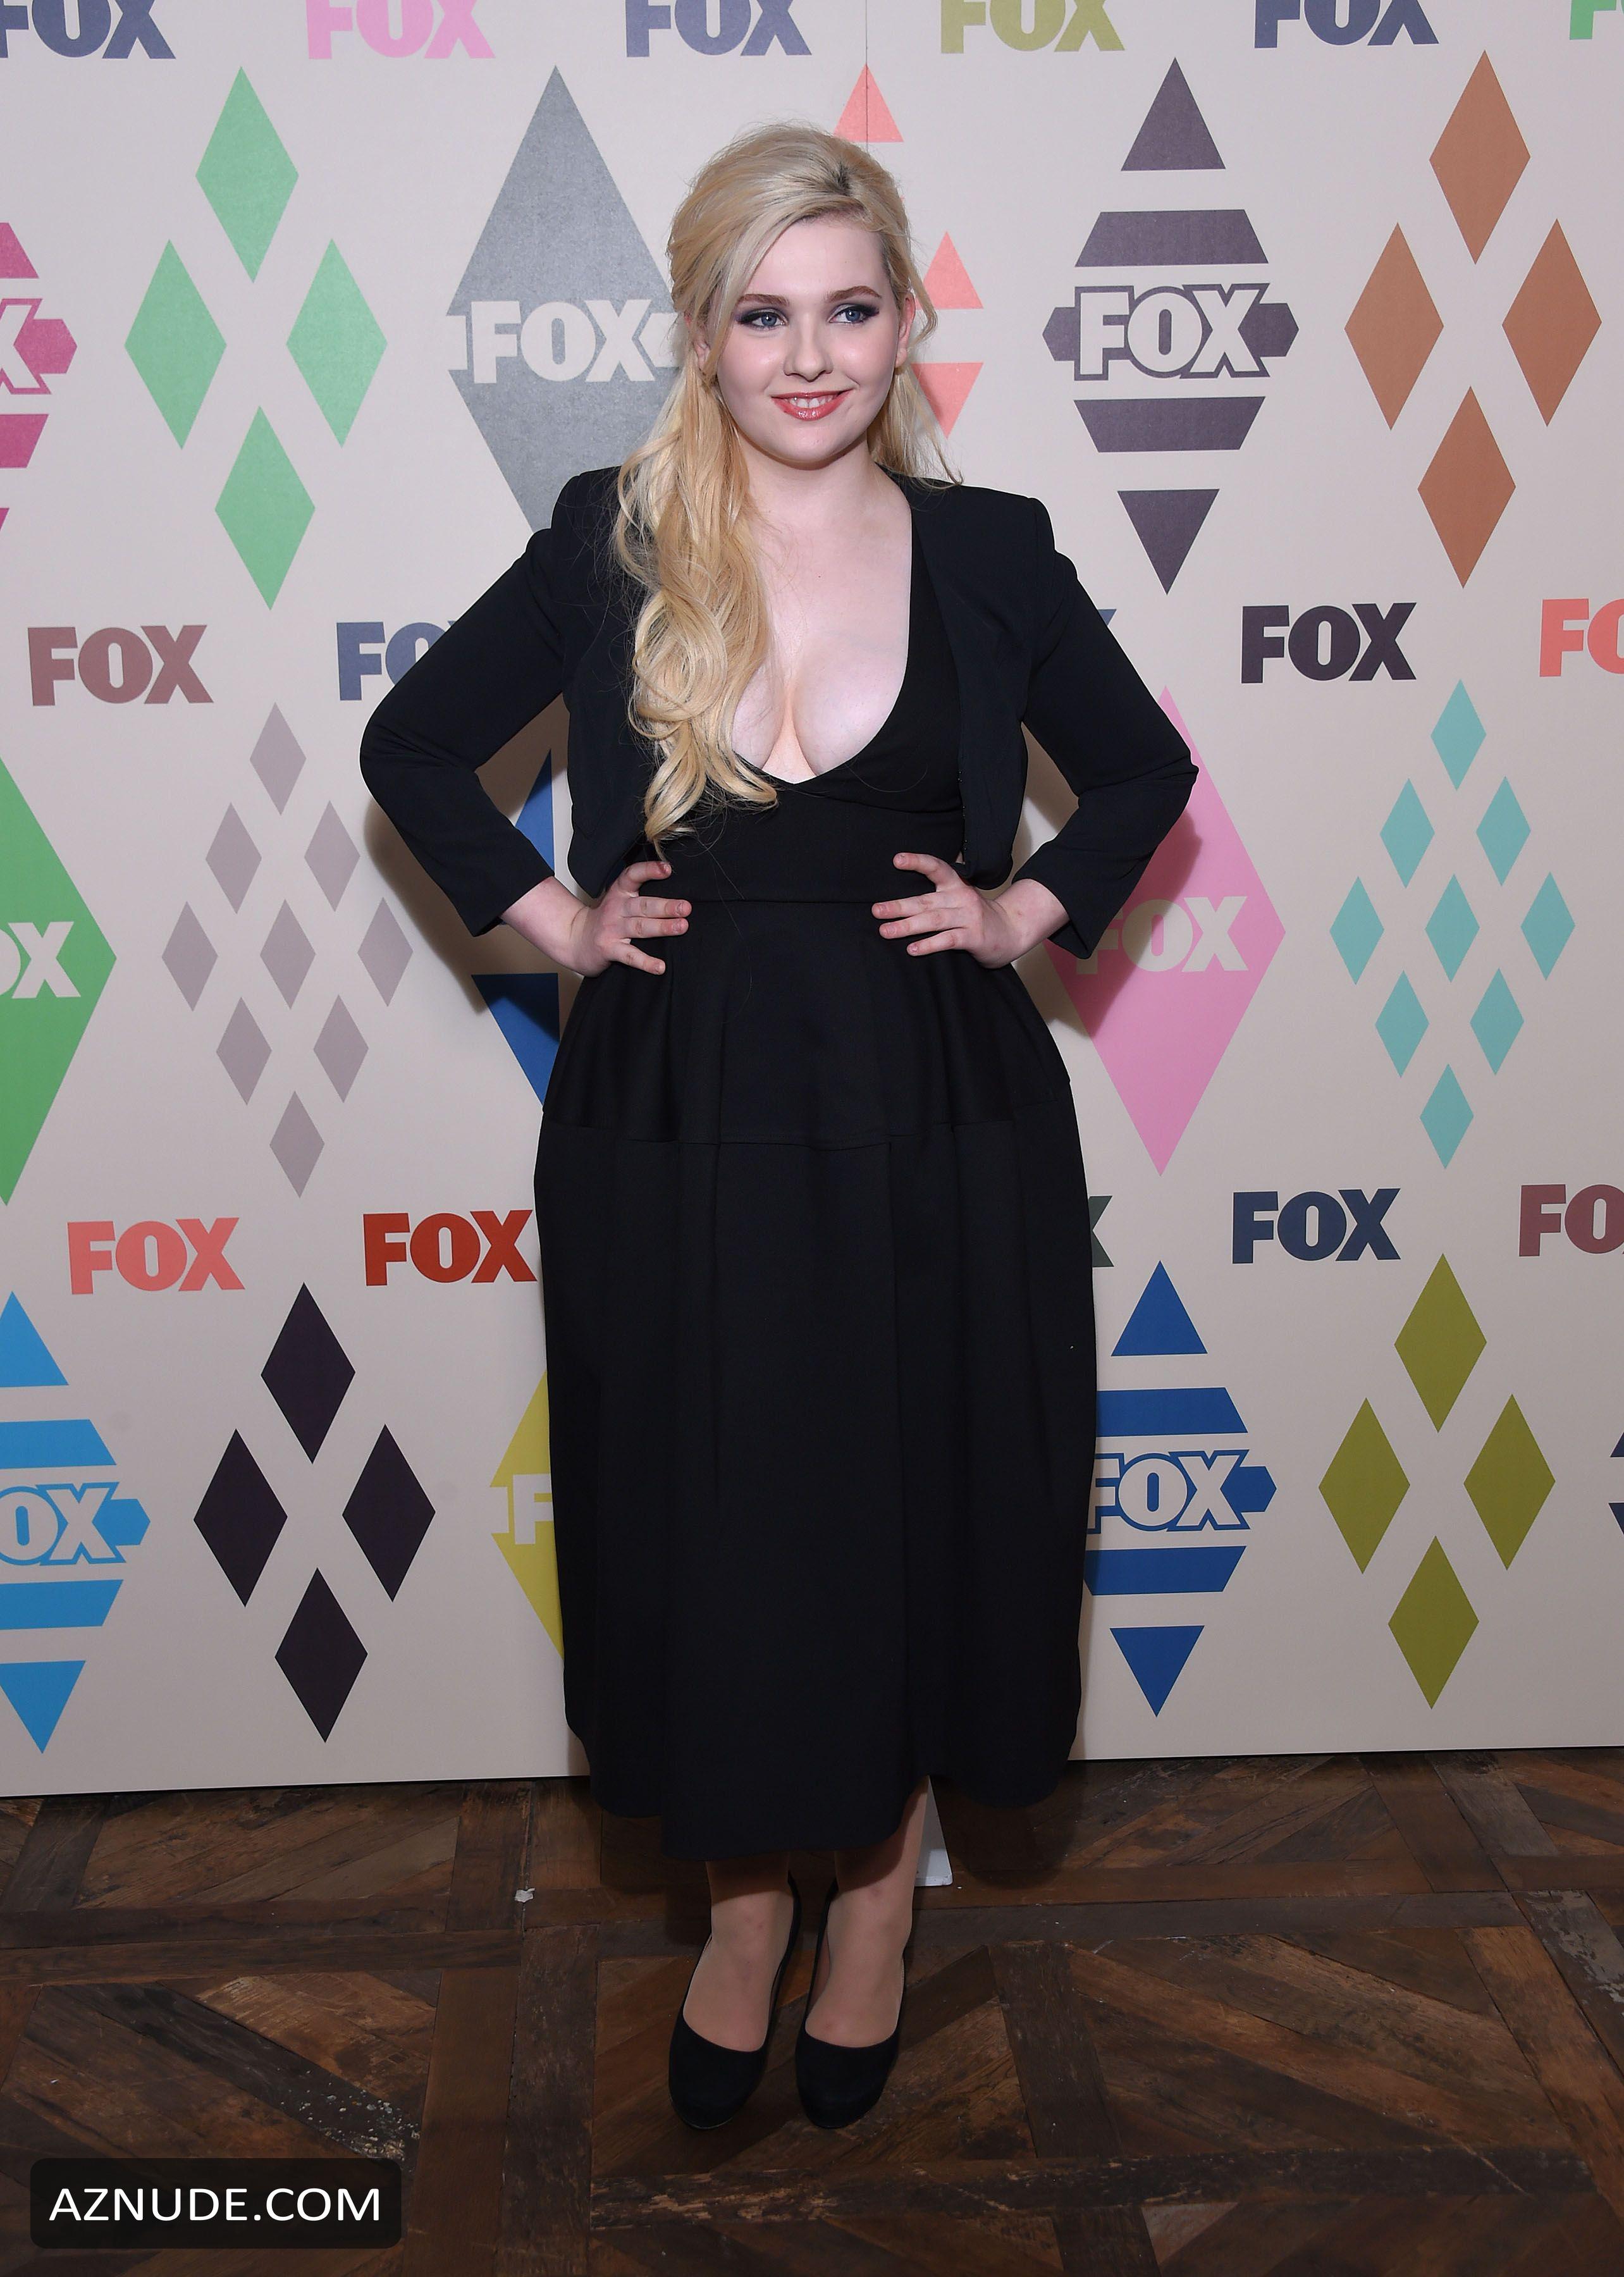 Abigail Breslin Cleavage At The Fox Fx Summer 2015 Tca Party In West Hollywood Aznude